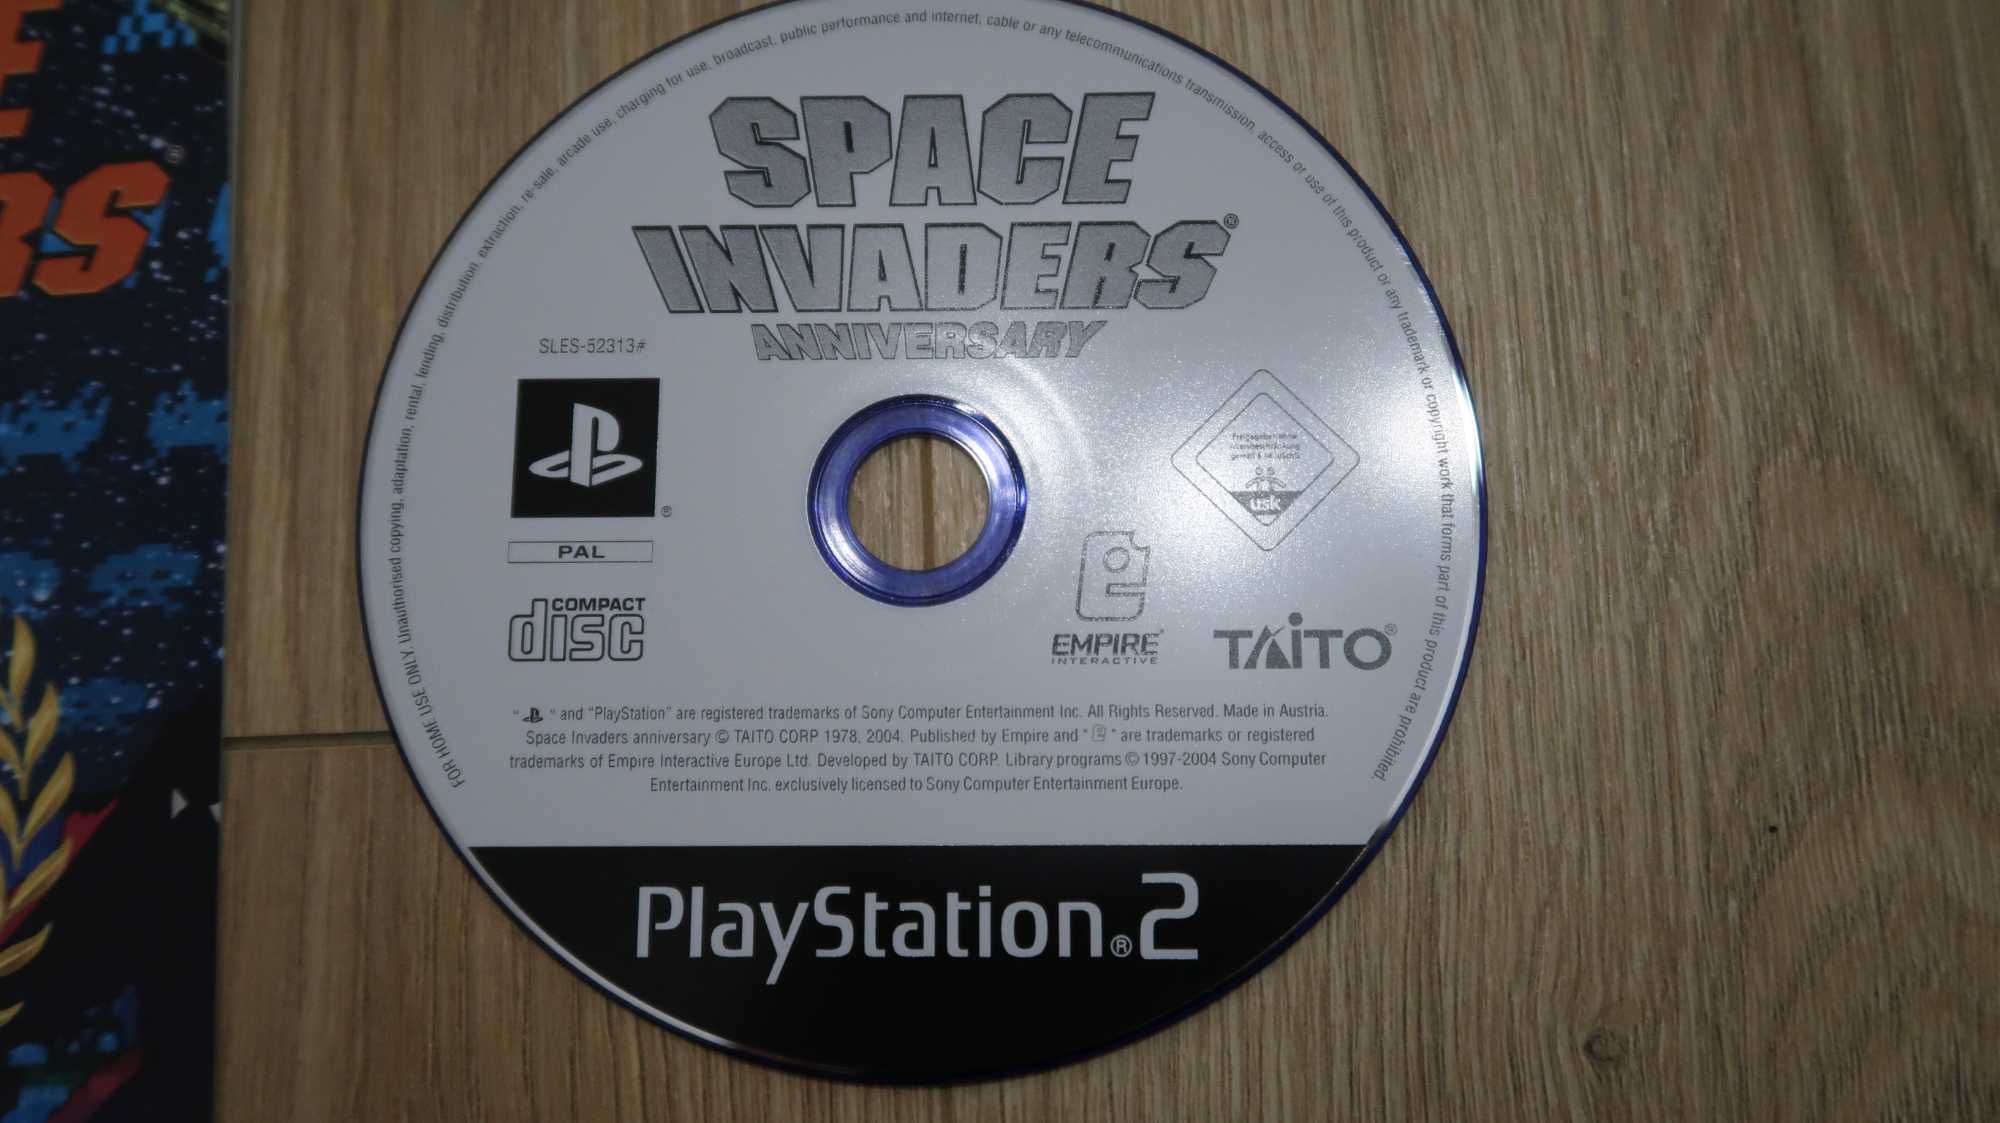 [PS2] Space Invaders Anniversary